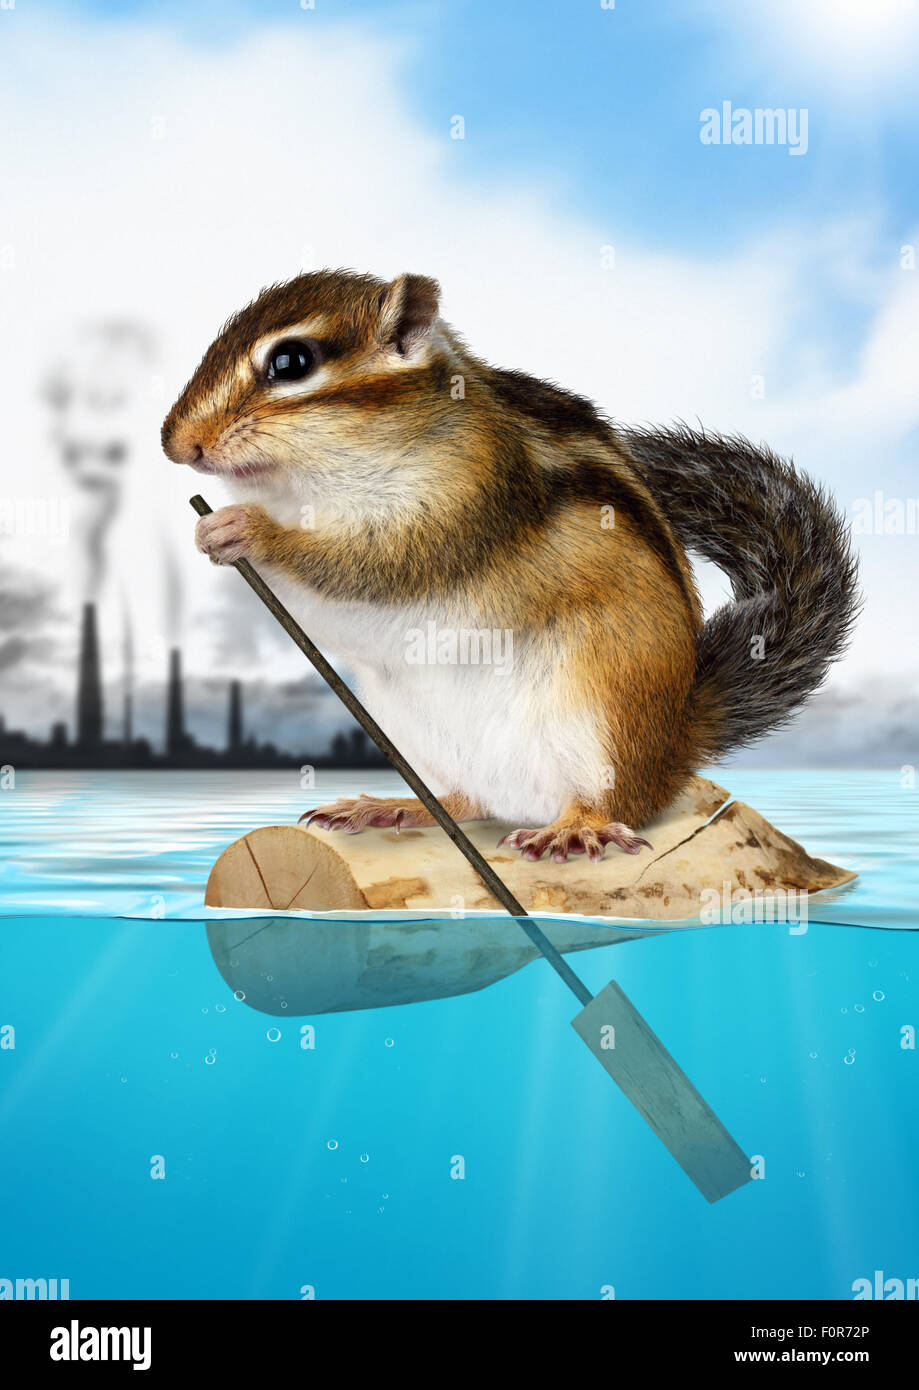 Animal Chipmunk floating away from the city, ecology concept Stock Photo